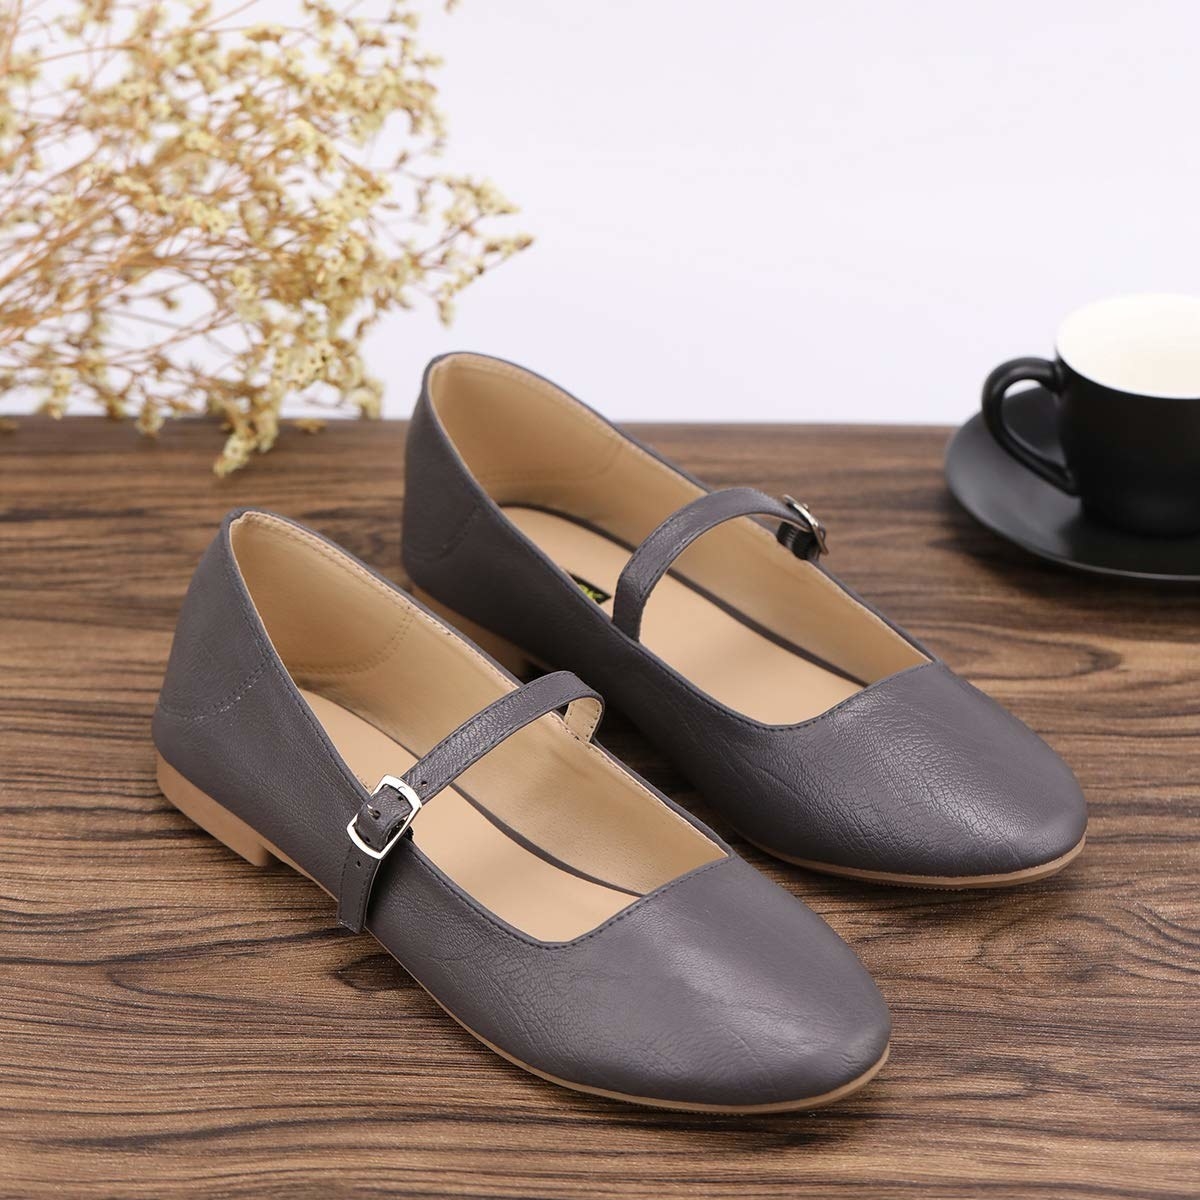 Simple Mary Janes with a round toe and a silver buckle and strap detail 